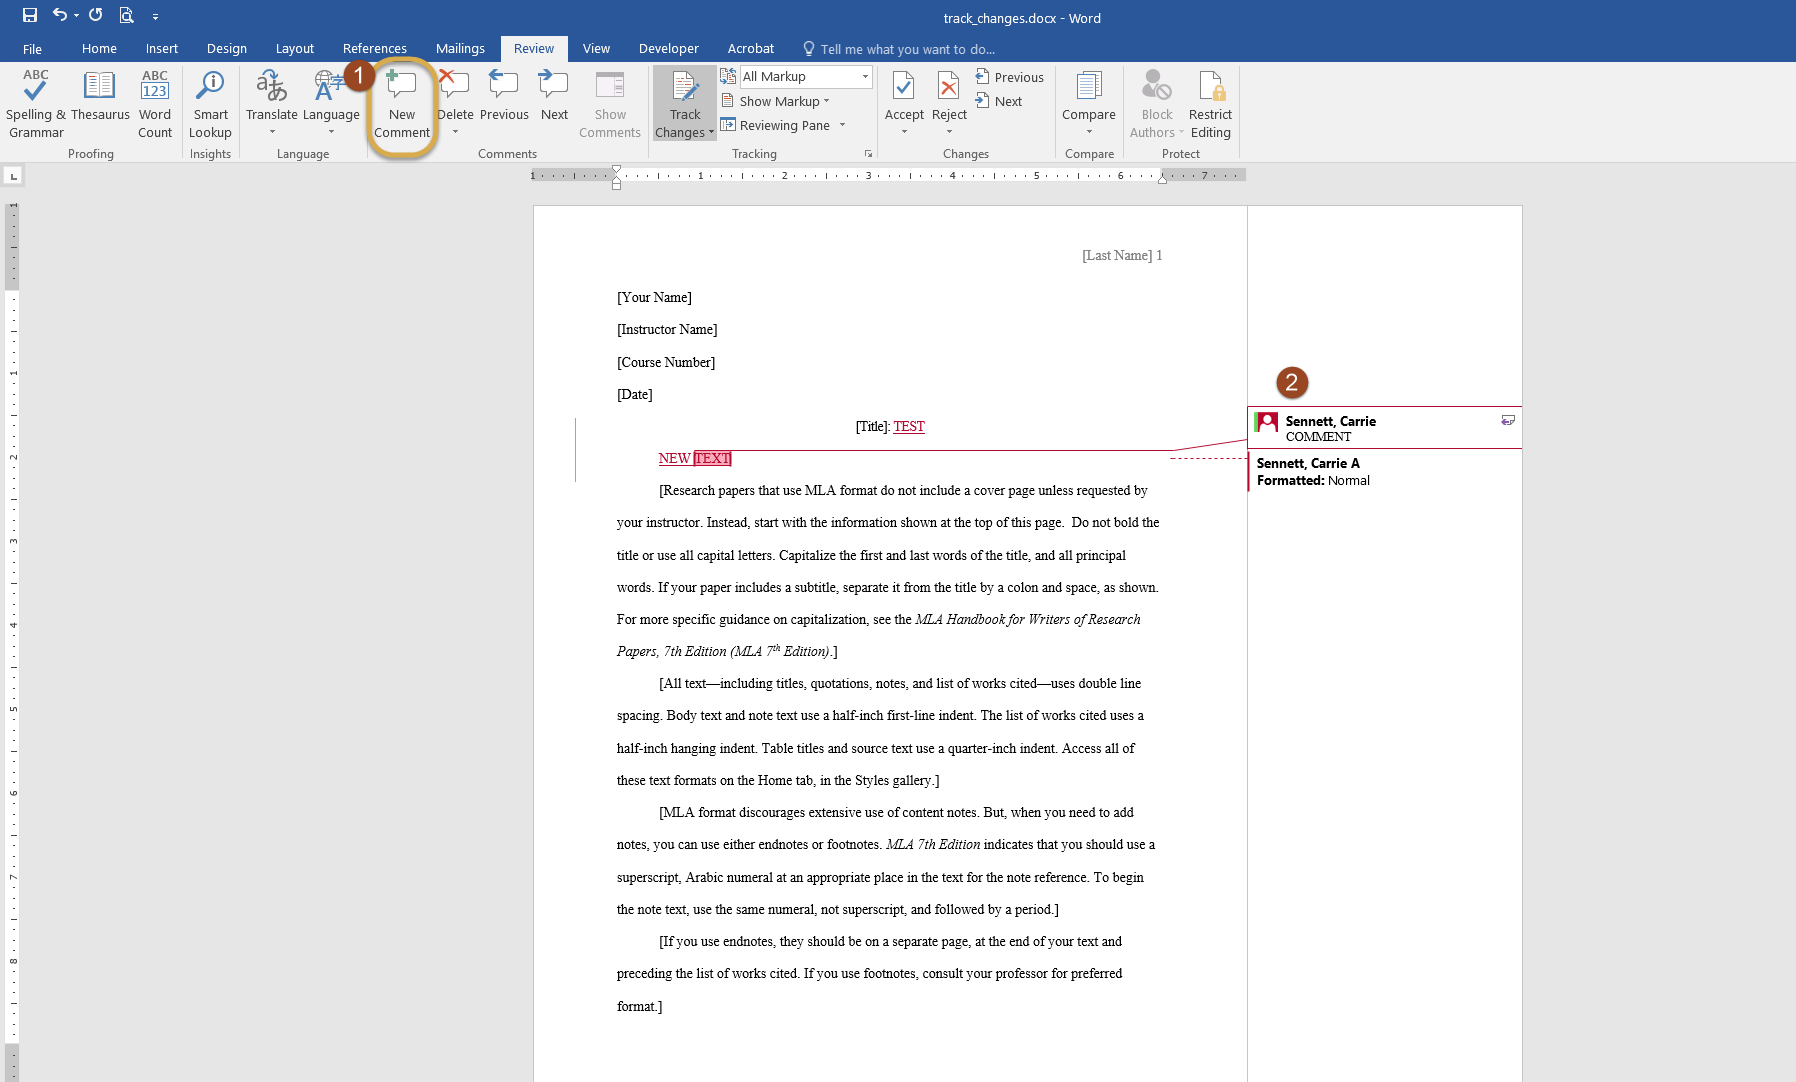 how to add comments in microsoft word